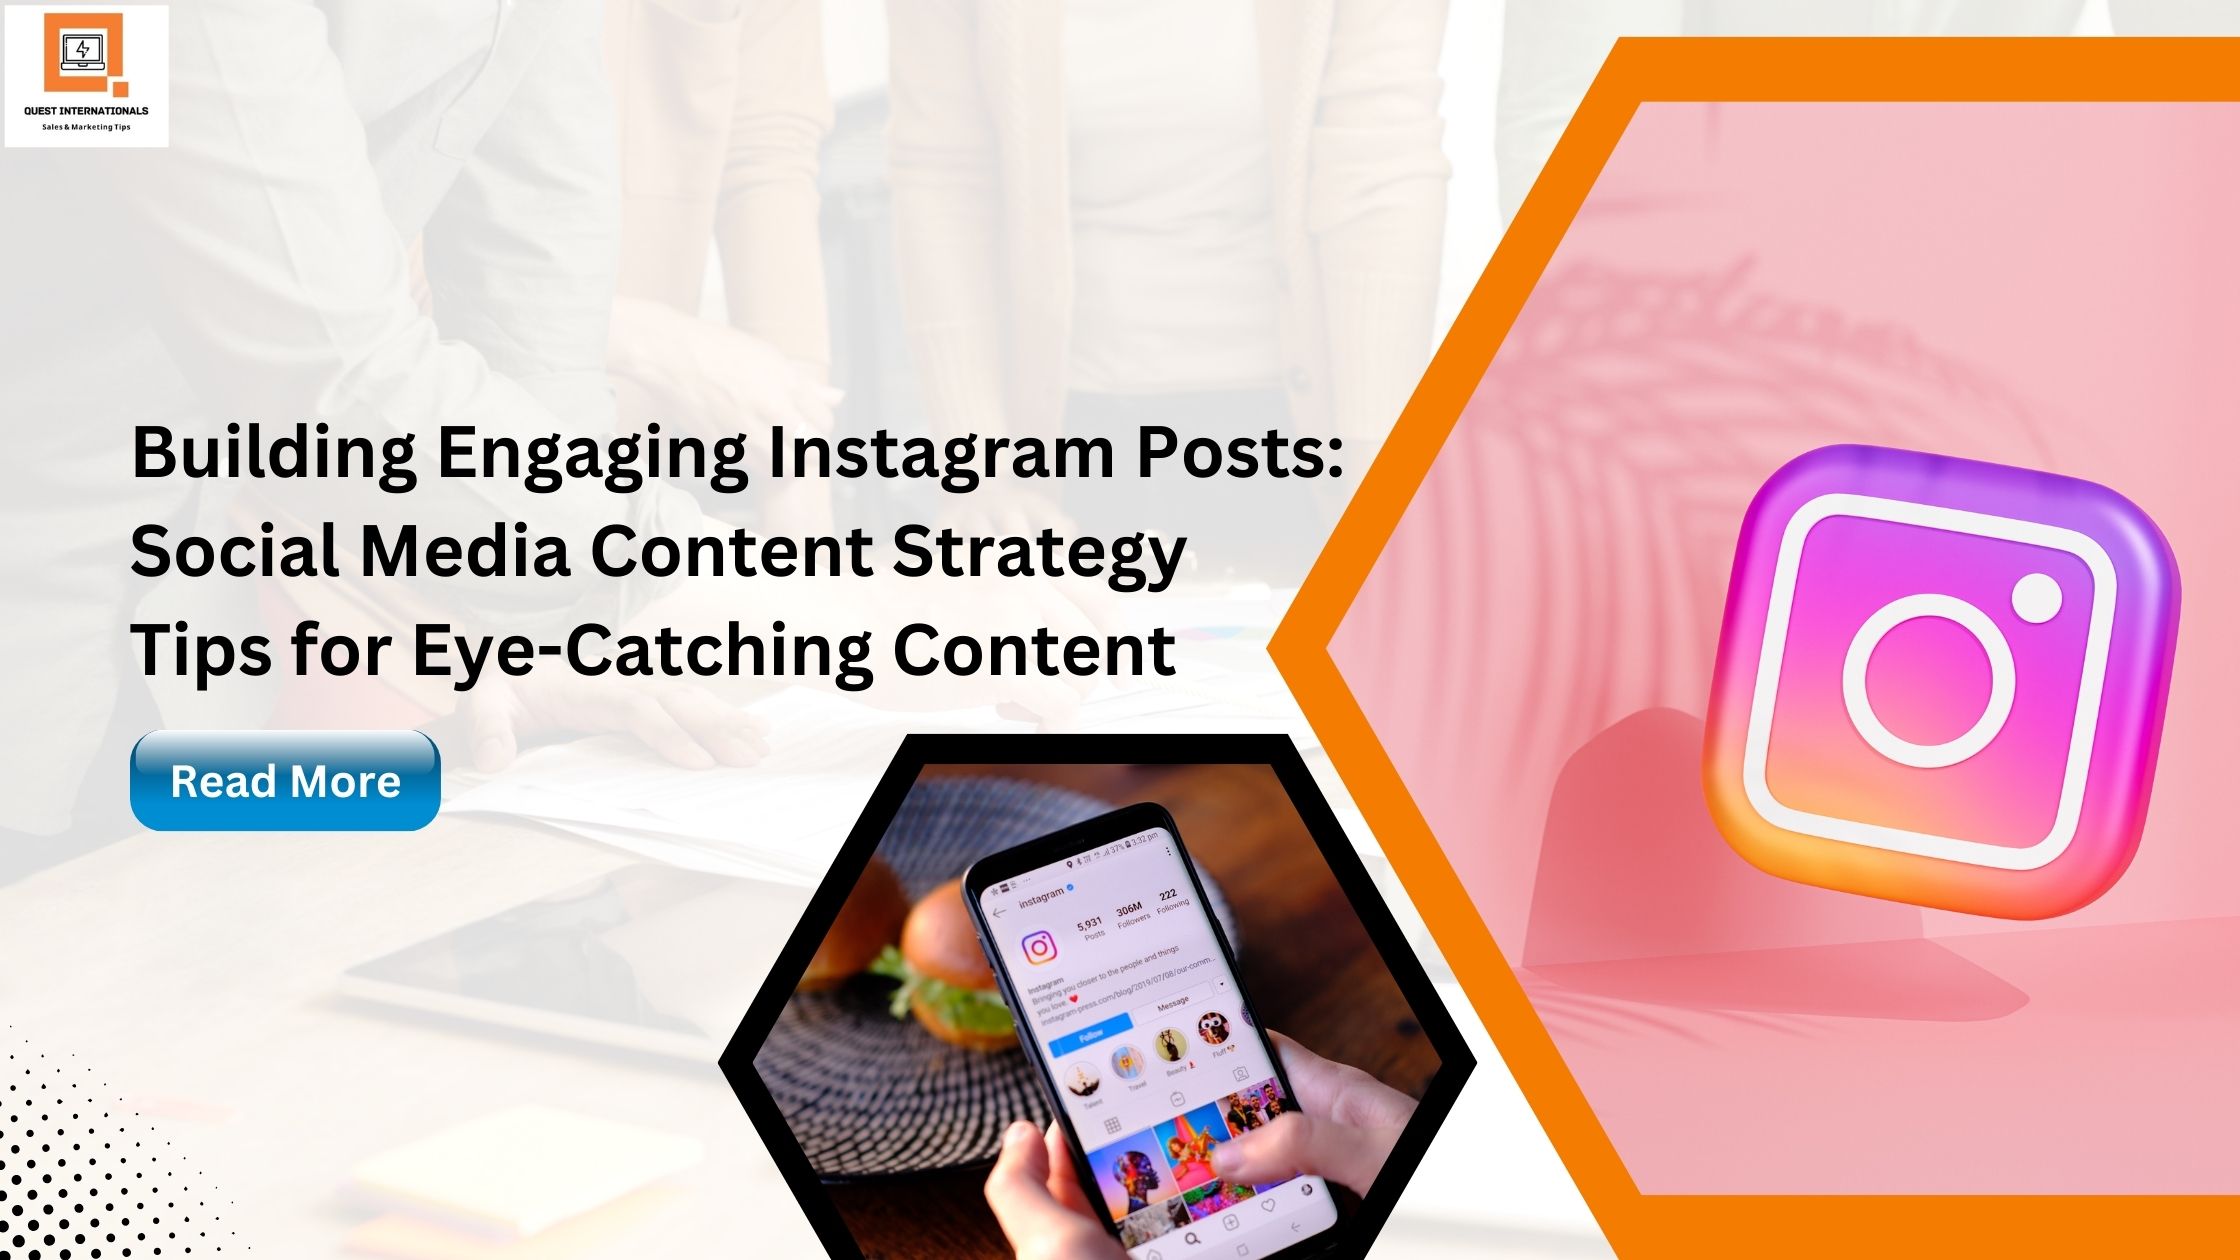 You are currently viewing Building Engaging Instagram Posts: Social Media Content Strategy Tips for Eye-Catching Content